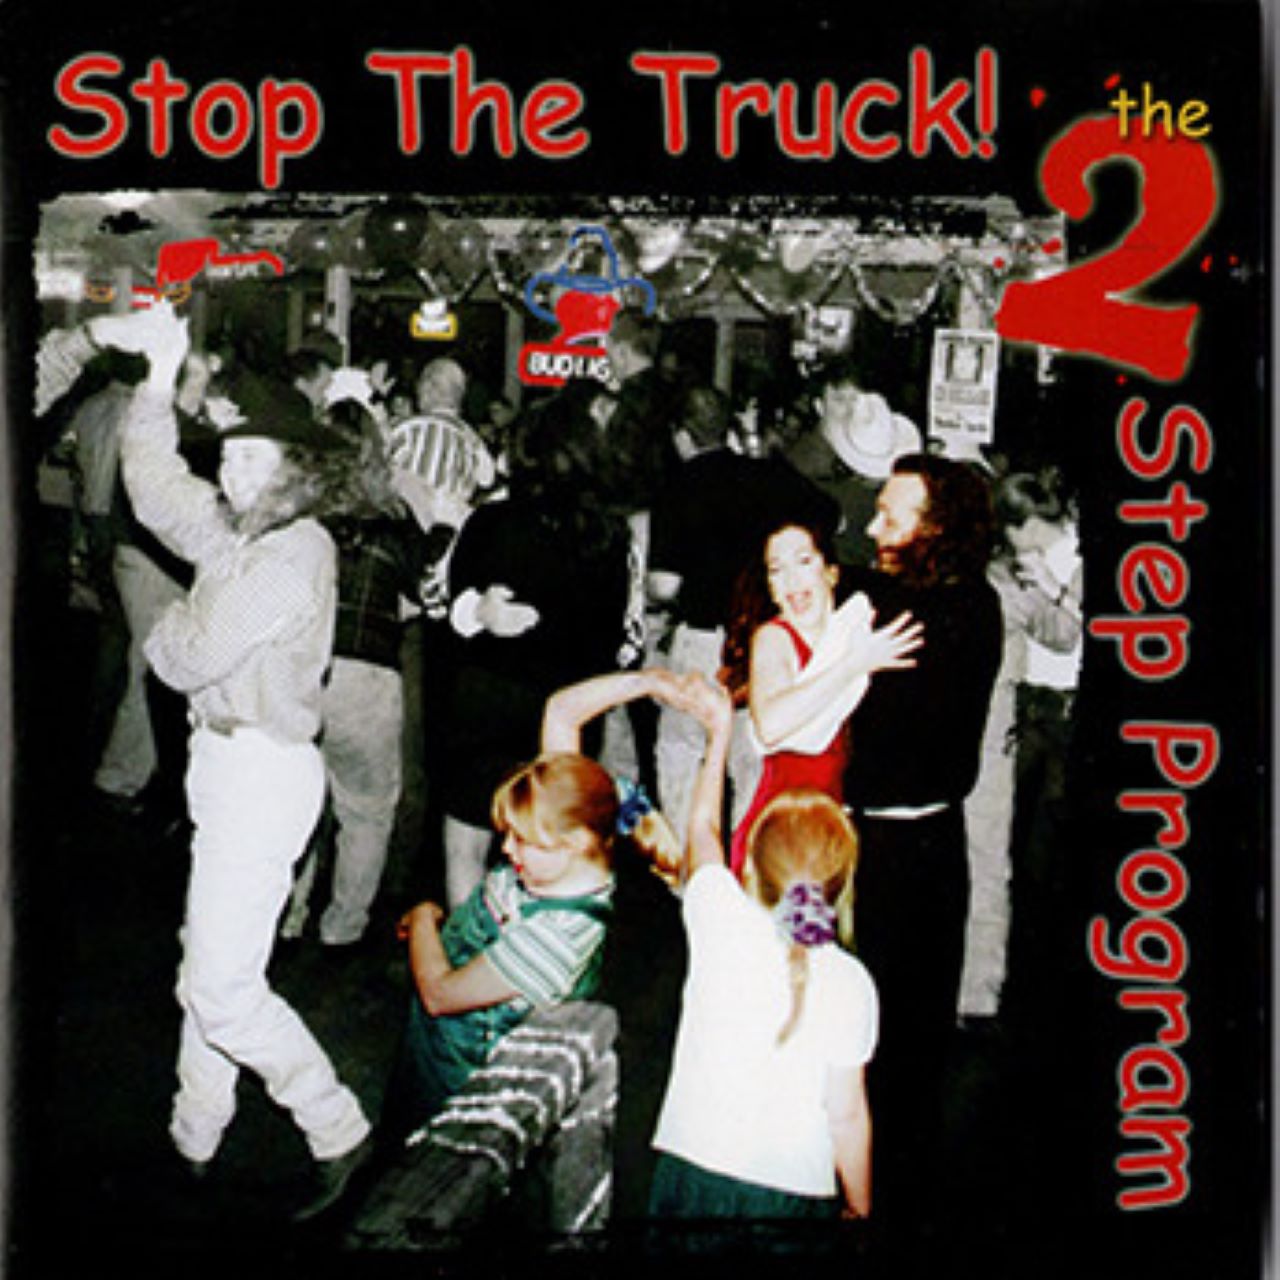 Stop The Truck - The 2 Step Program cover album